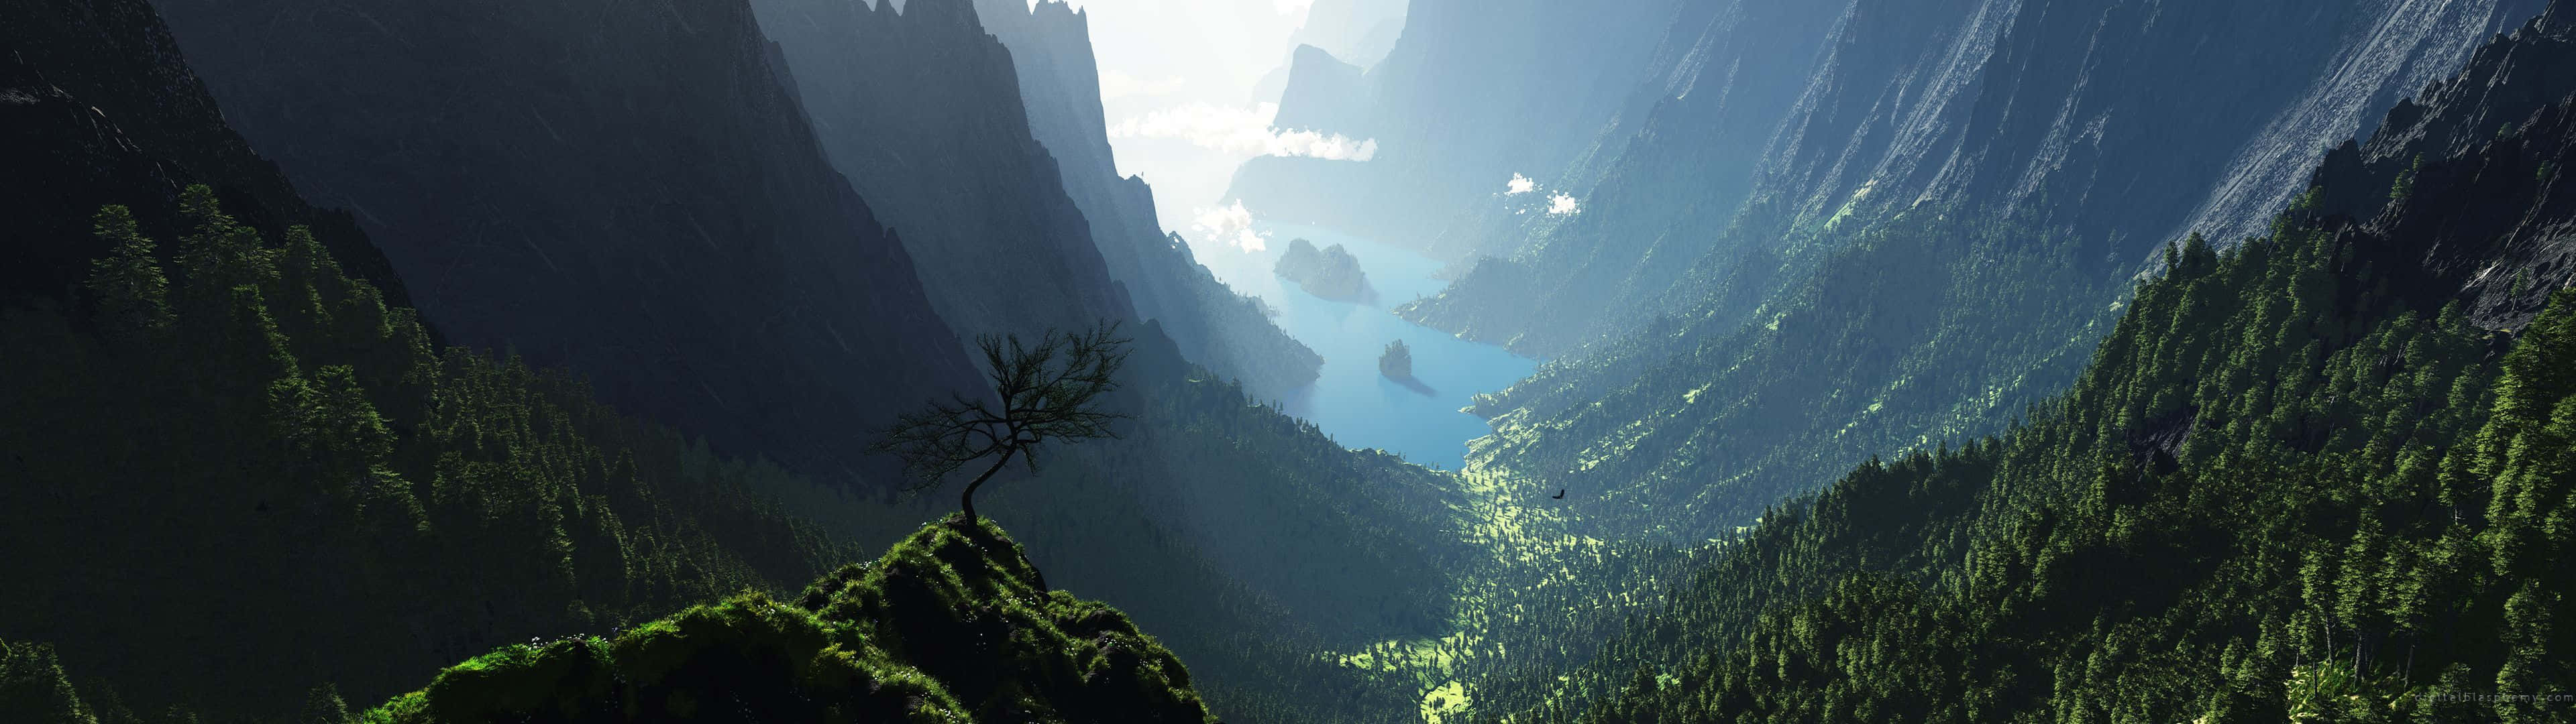 Fjord Valley Best Monitor Background